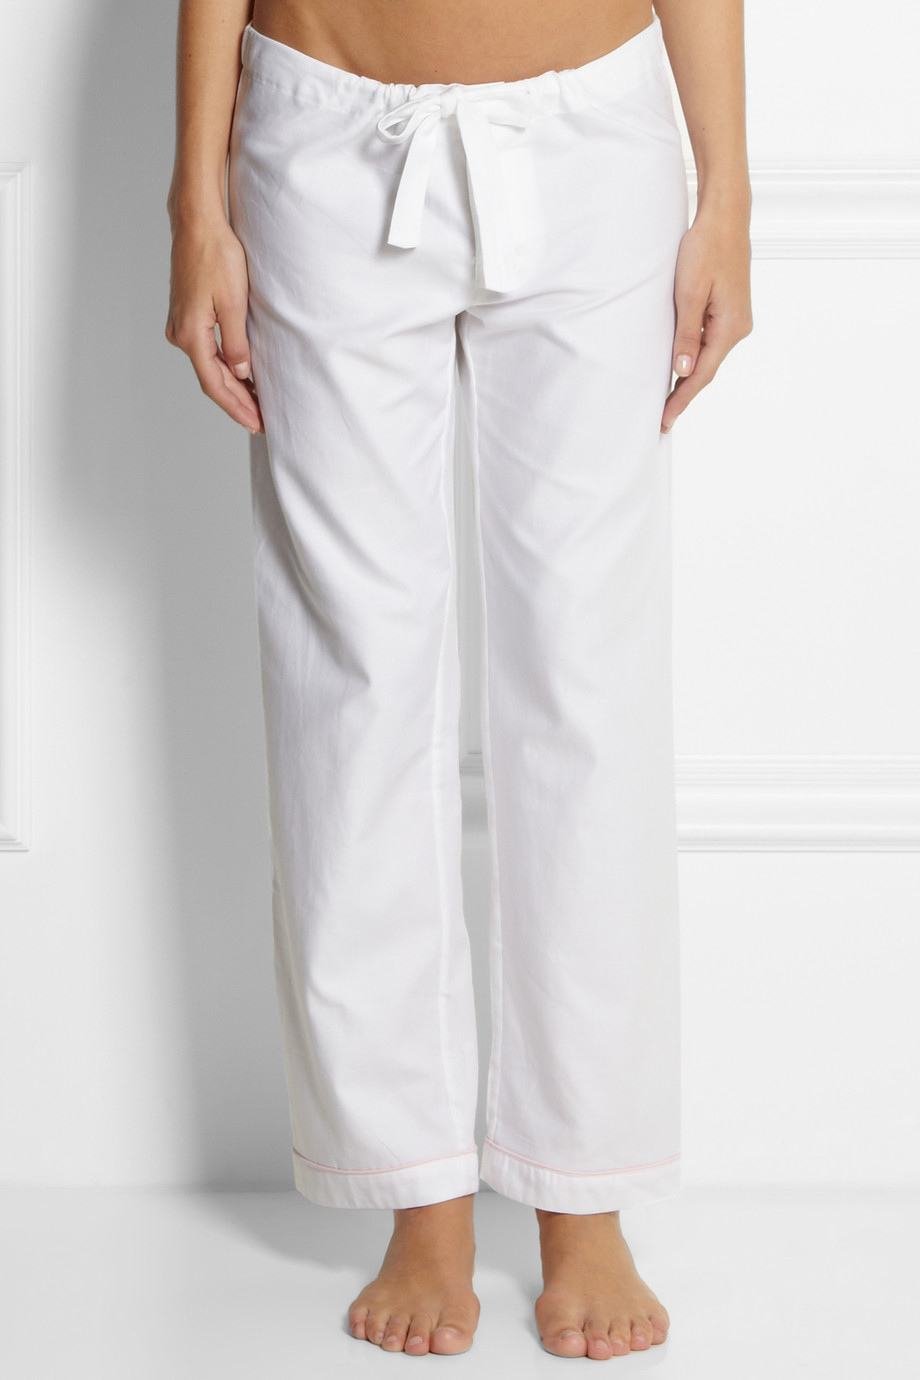 Bodas Cottontwill Pajama Pants in White - Lyst